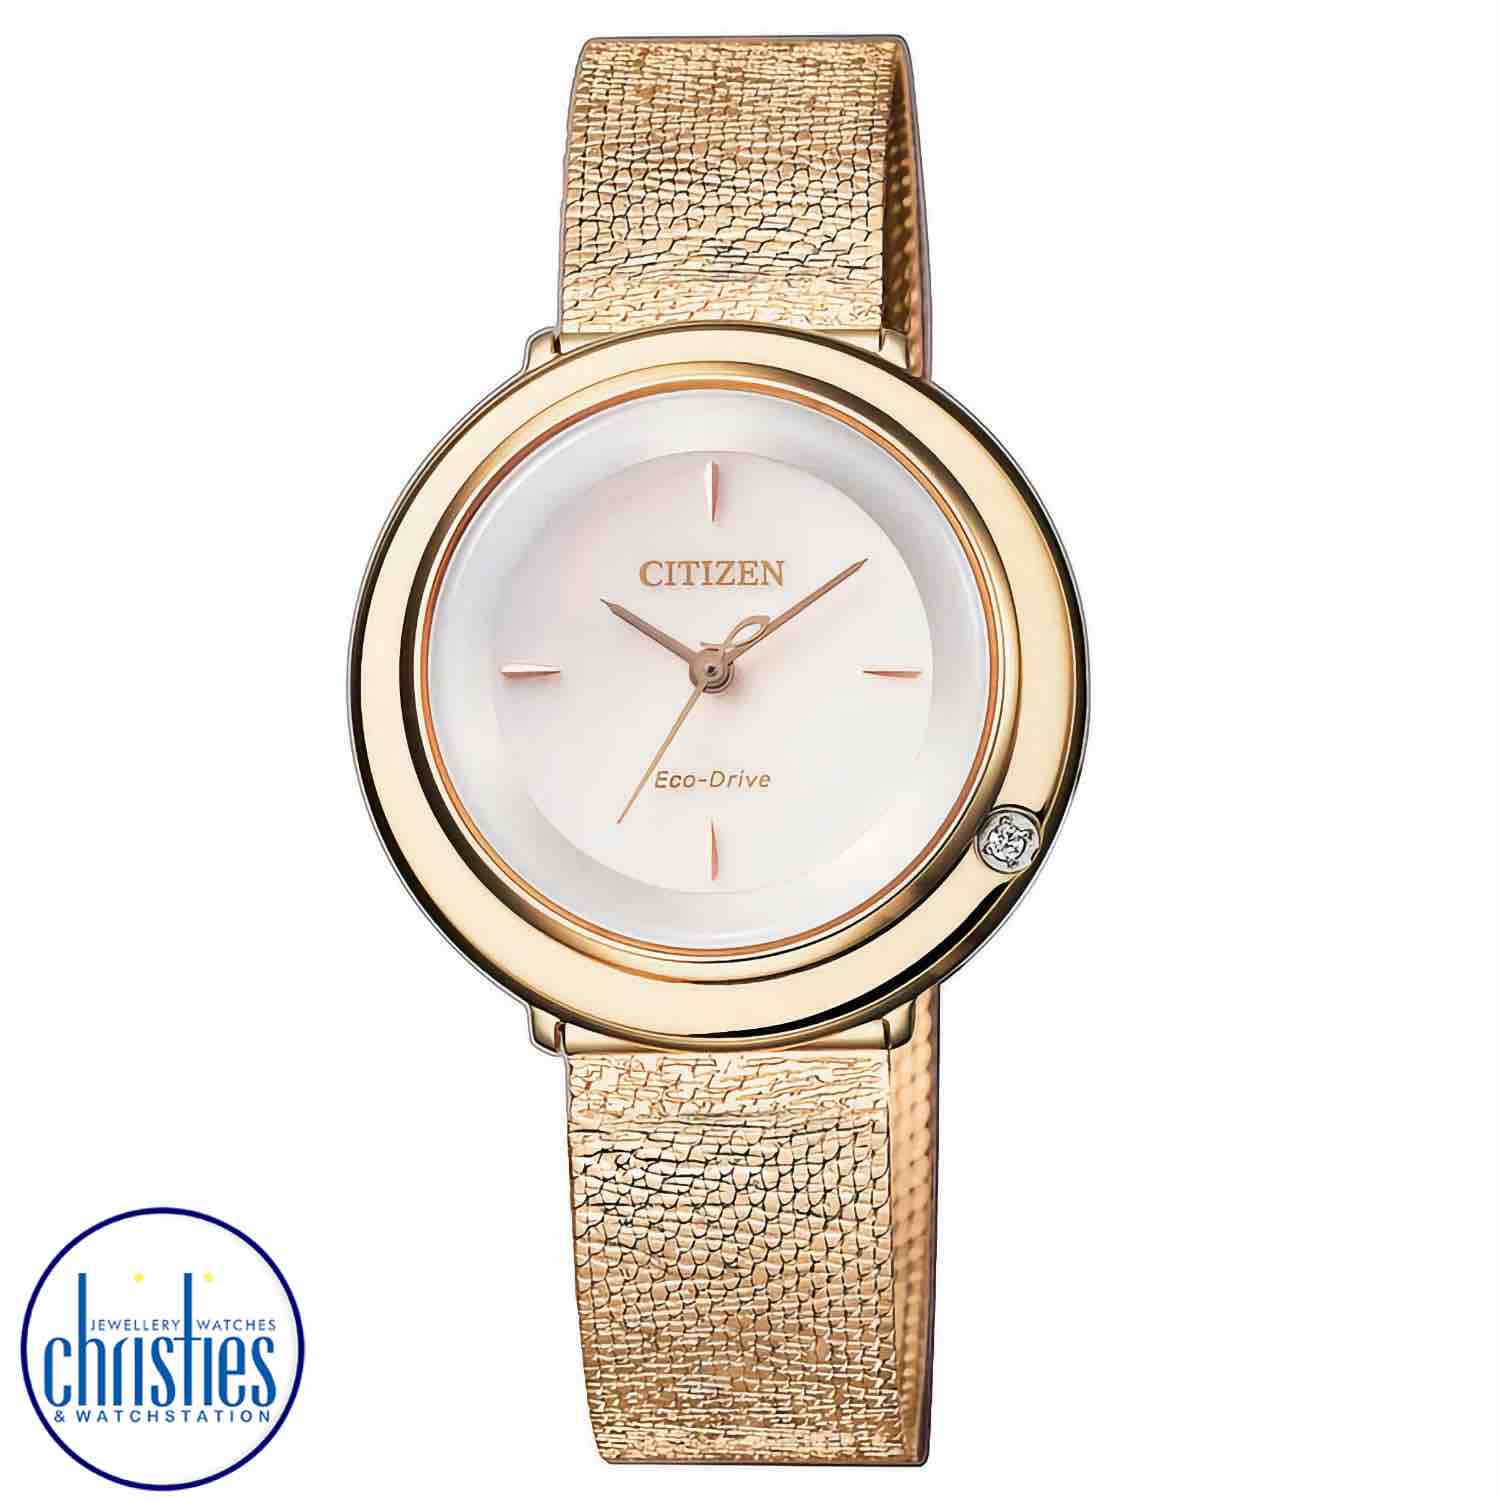 EM0643-84X CITIZEN Eco-Drive Watch. Embrace beauty and power with a new style of luxury watch for ladies, the Citizen L Ambiluna.